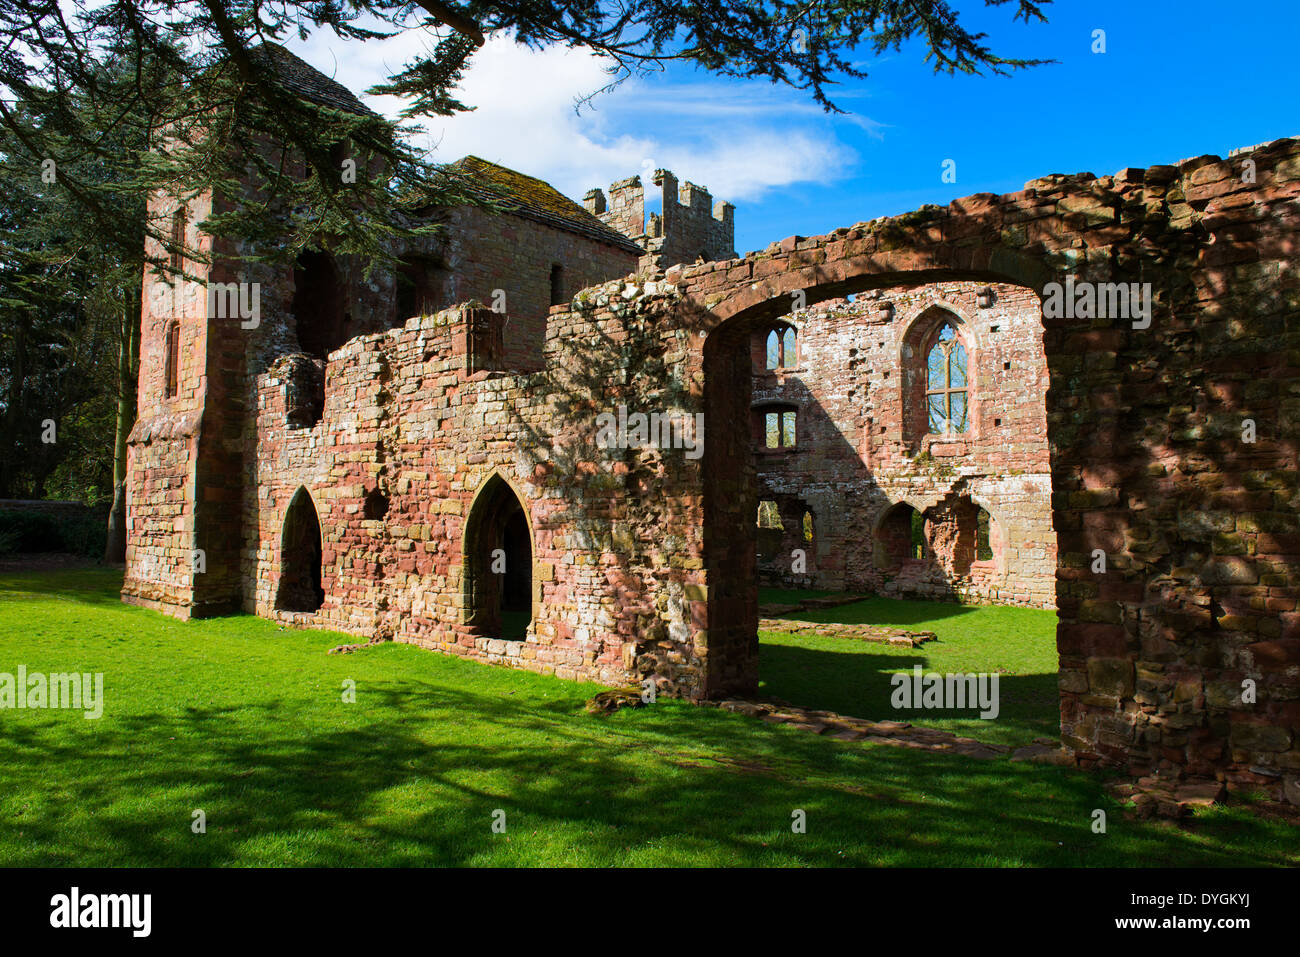 Acton Burnell Castle, a 13th century fortified manor house, near the village of Acton Burnell in Shropshire, England. Stock Photo